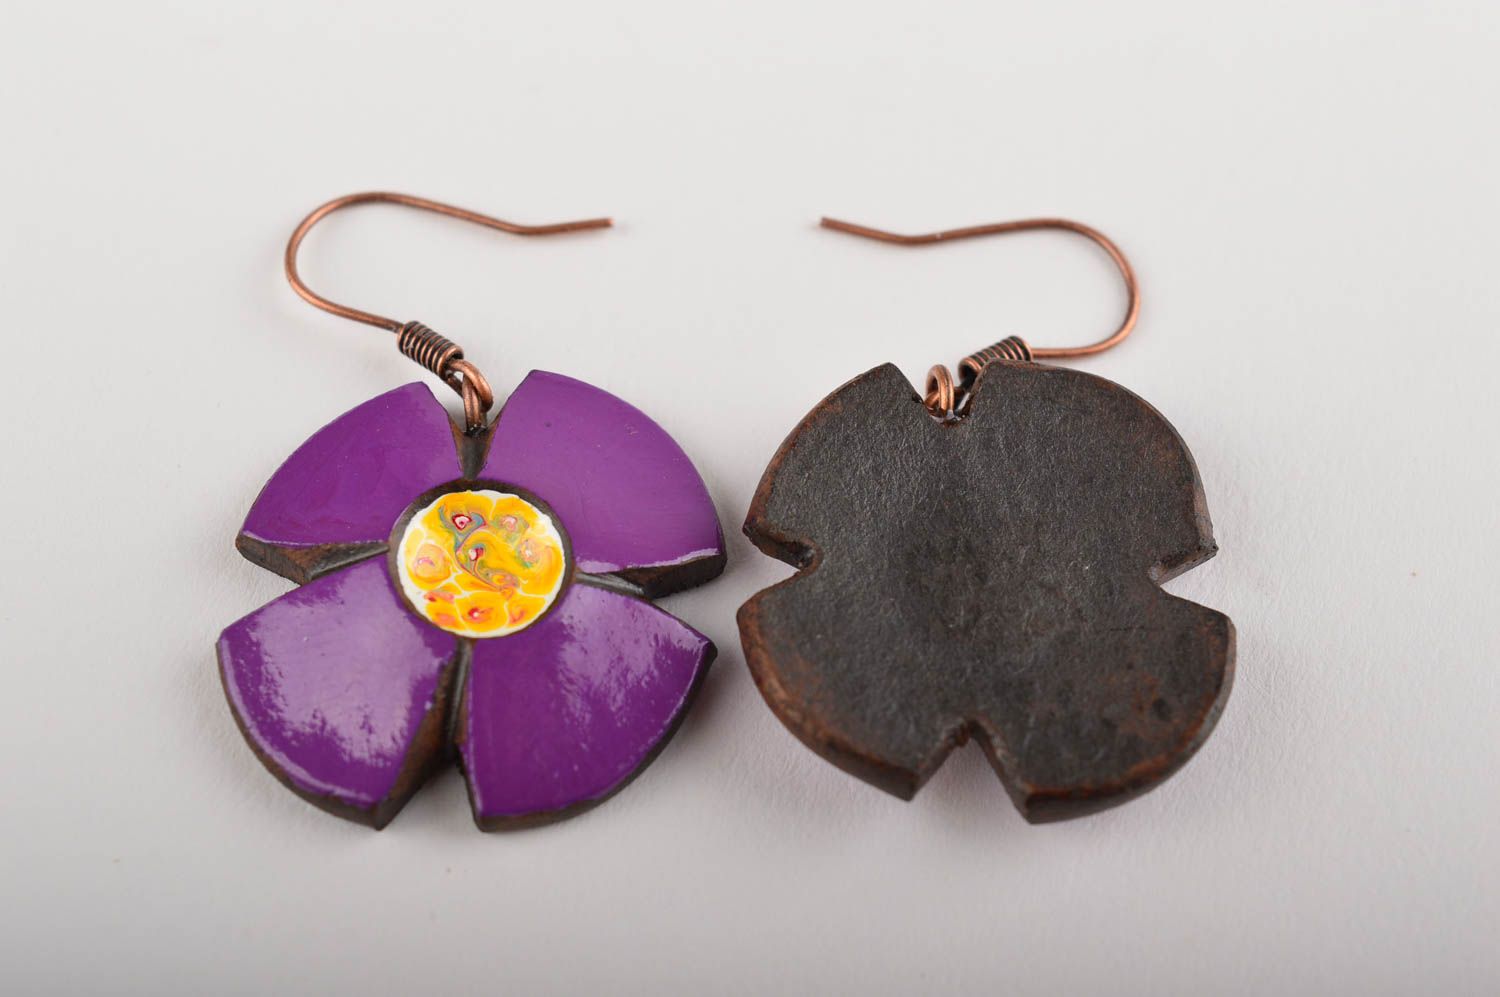 Handmade earrings ceramic jewelry fashion accessories for women unique gifts photo 4